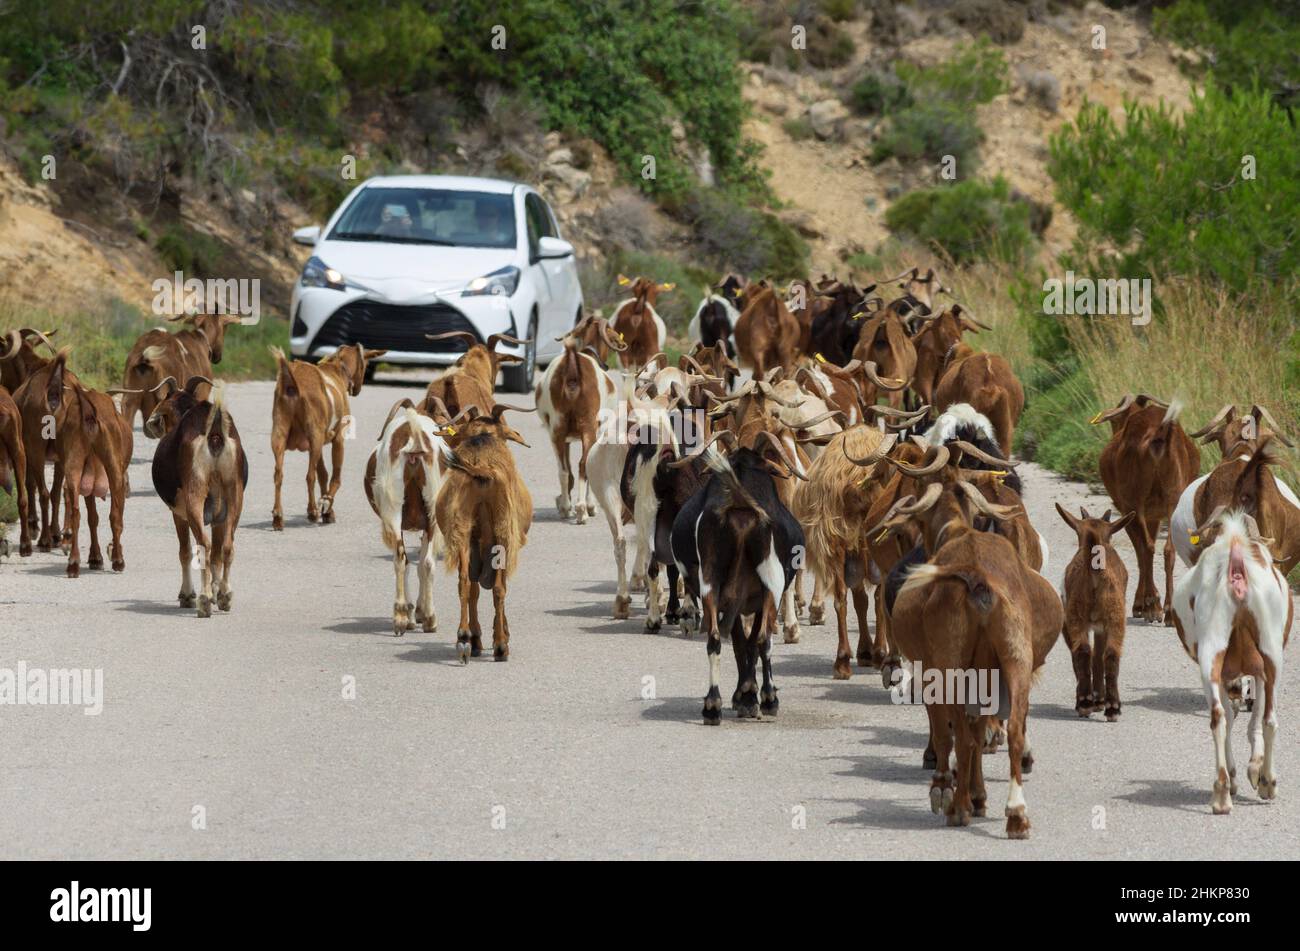 Highway was blocked by a large herd of goats walking forward against the background of a blurred car and mountains (Rhodes, Greece) Stock Photo